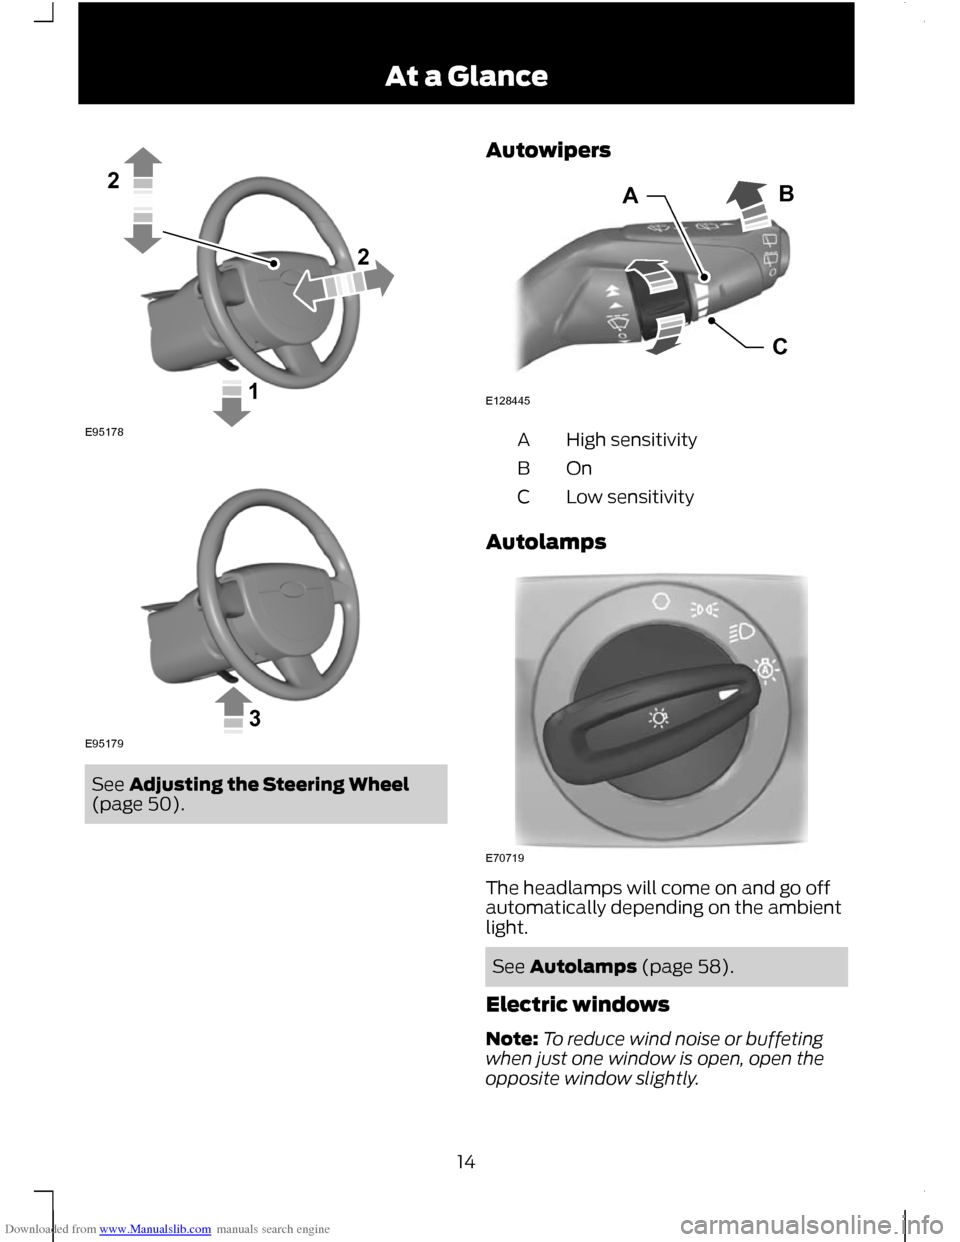 FORD C MAX 2011 2.G Owners Manual Downloaded from www.Manualslib.com manuals search engine See Adjusting the Steering Wheel
(page 50). Autowipers High sensitivity
A
OnB
Low sensitivity
C
Autolamps The headlamps will come on and go off